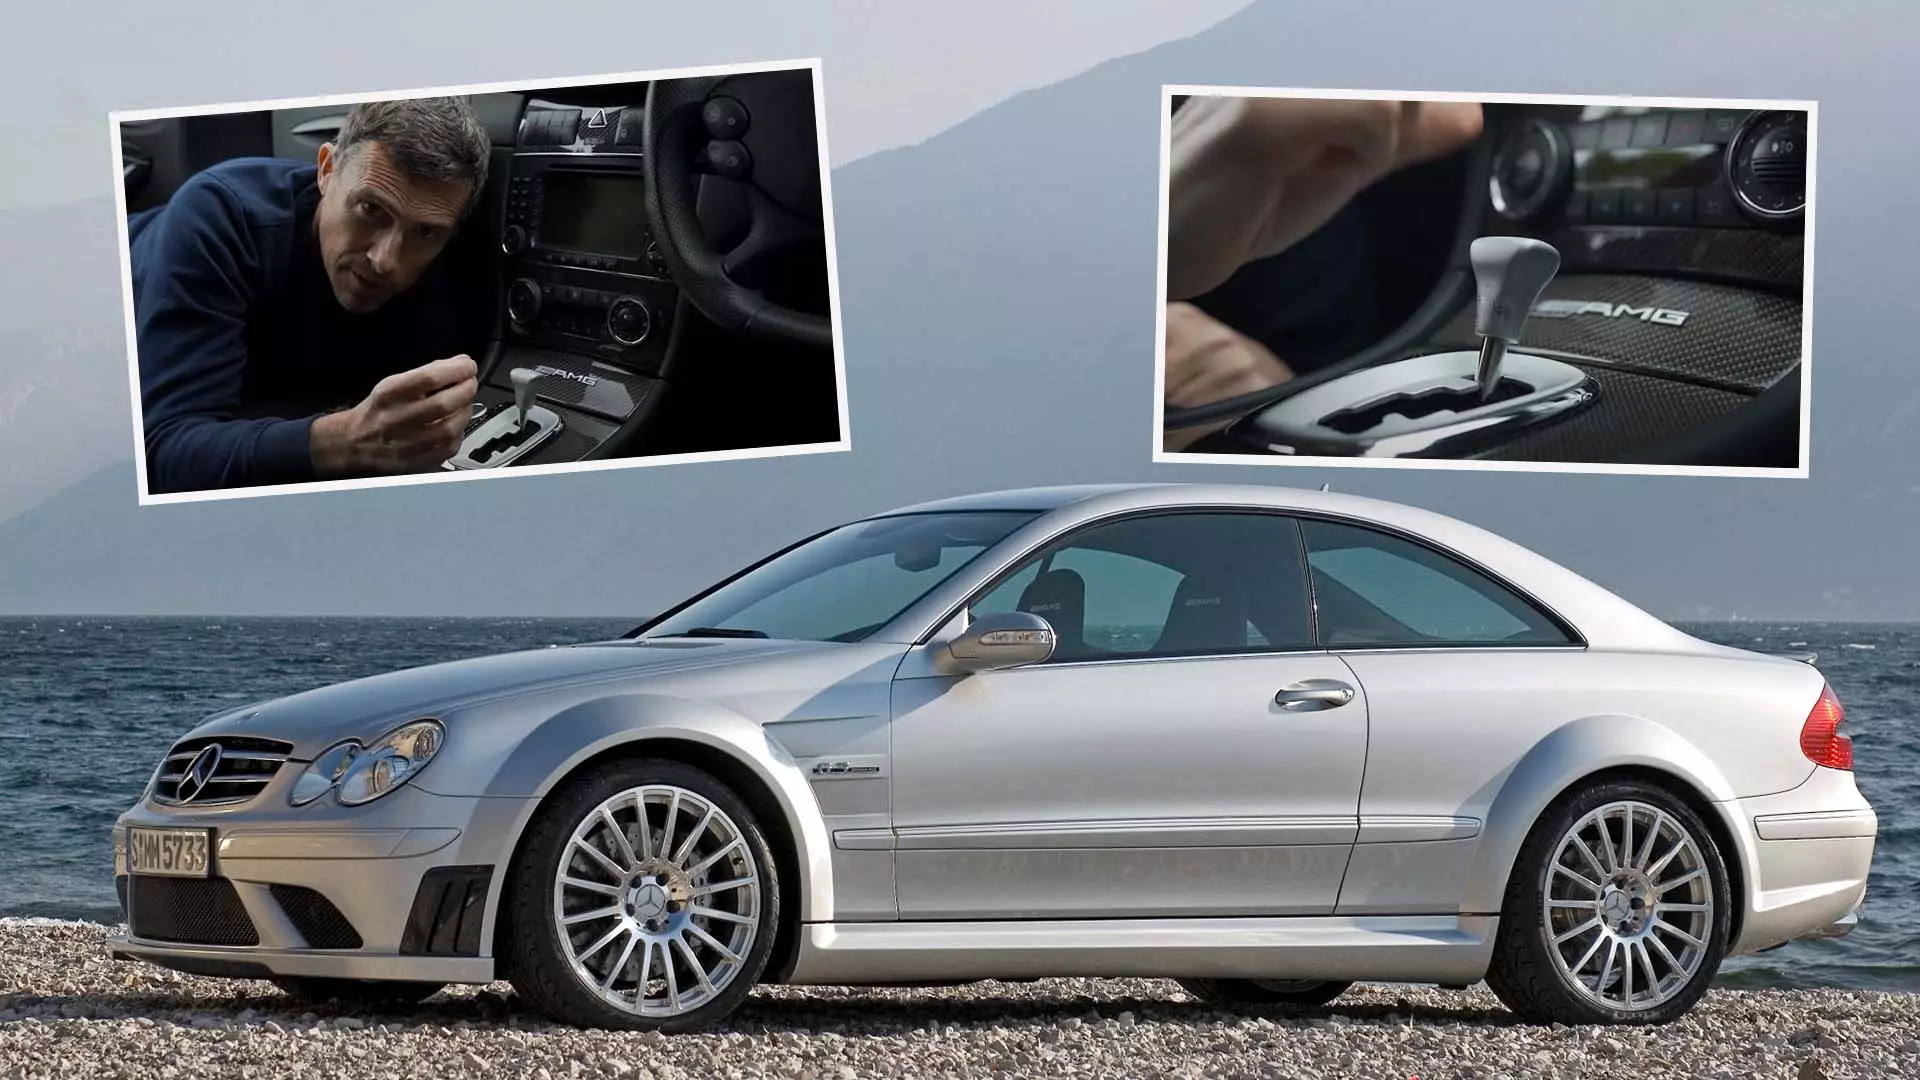 Jeremy Clarkson’s Old CLK 63 Black Series Is Still on the Road Blowing Car Reviewers’ Minds | Autance